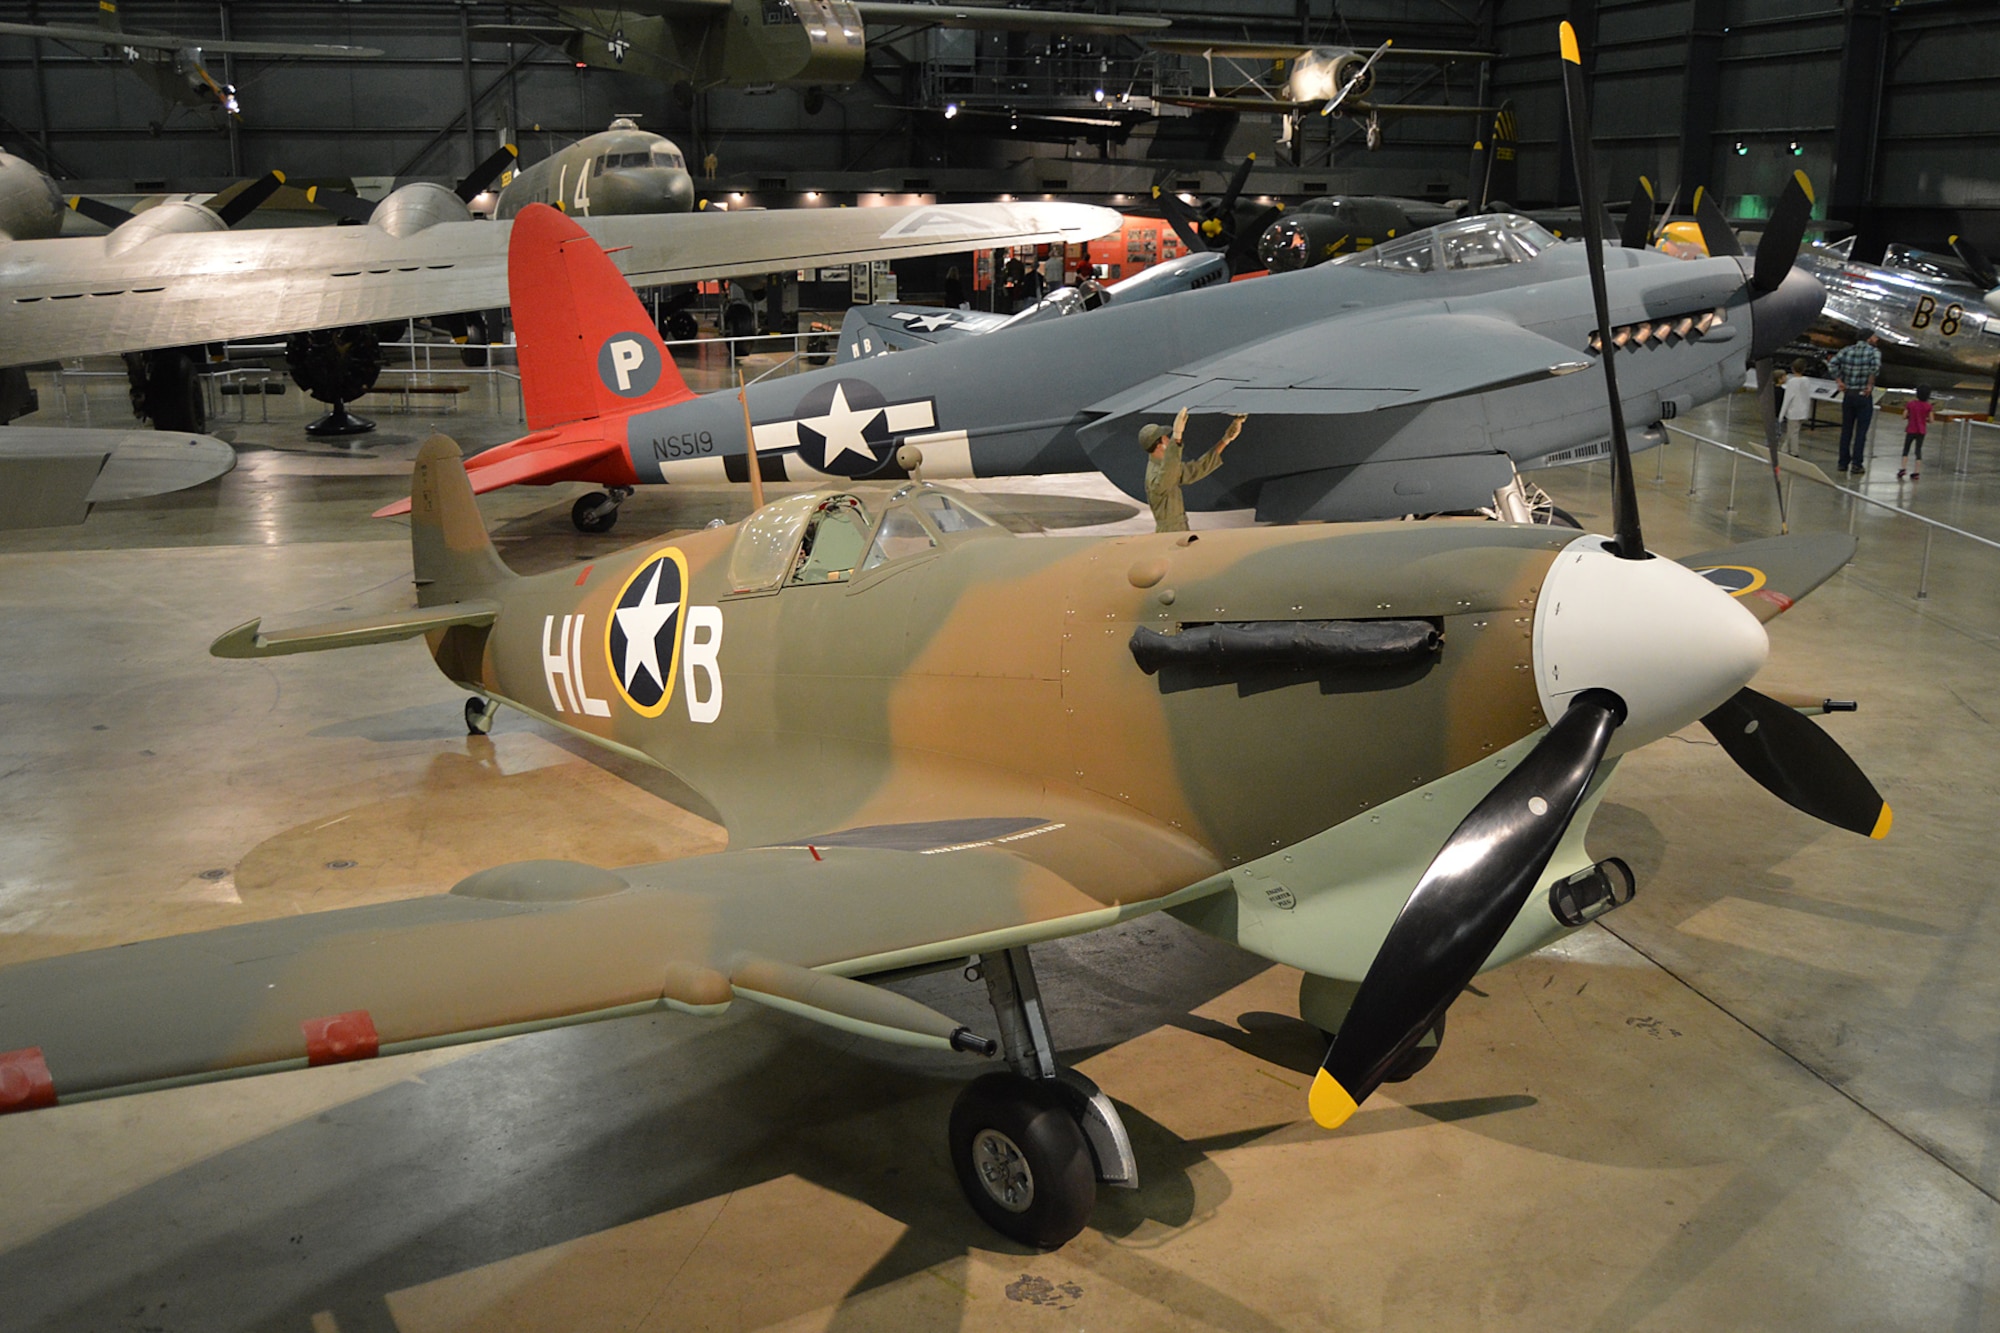 DAYTON, Ohio -- Supermarine Spitfire Mk.Vc in the World War II Gallery at the National Museum of the United States Air Force. (U.S. Air Force photo)
